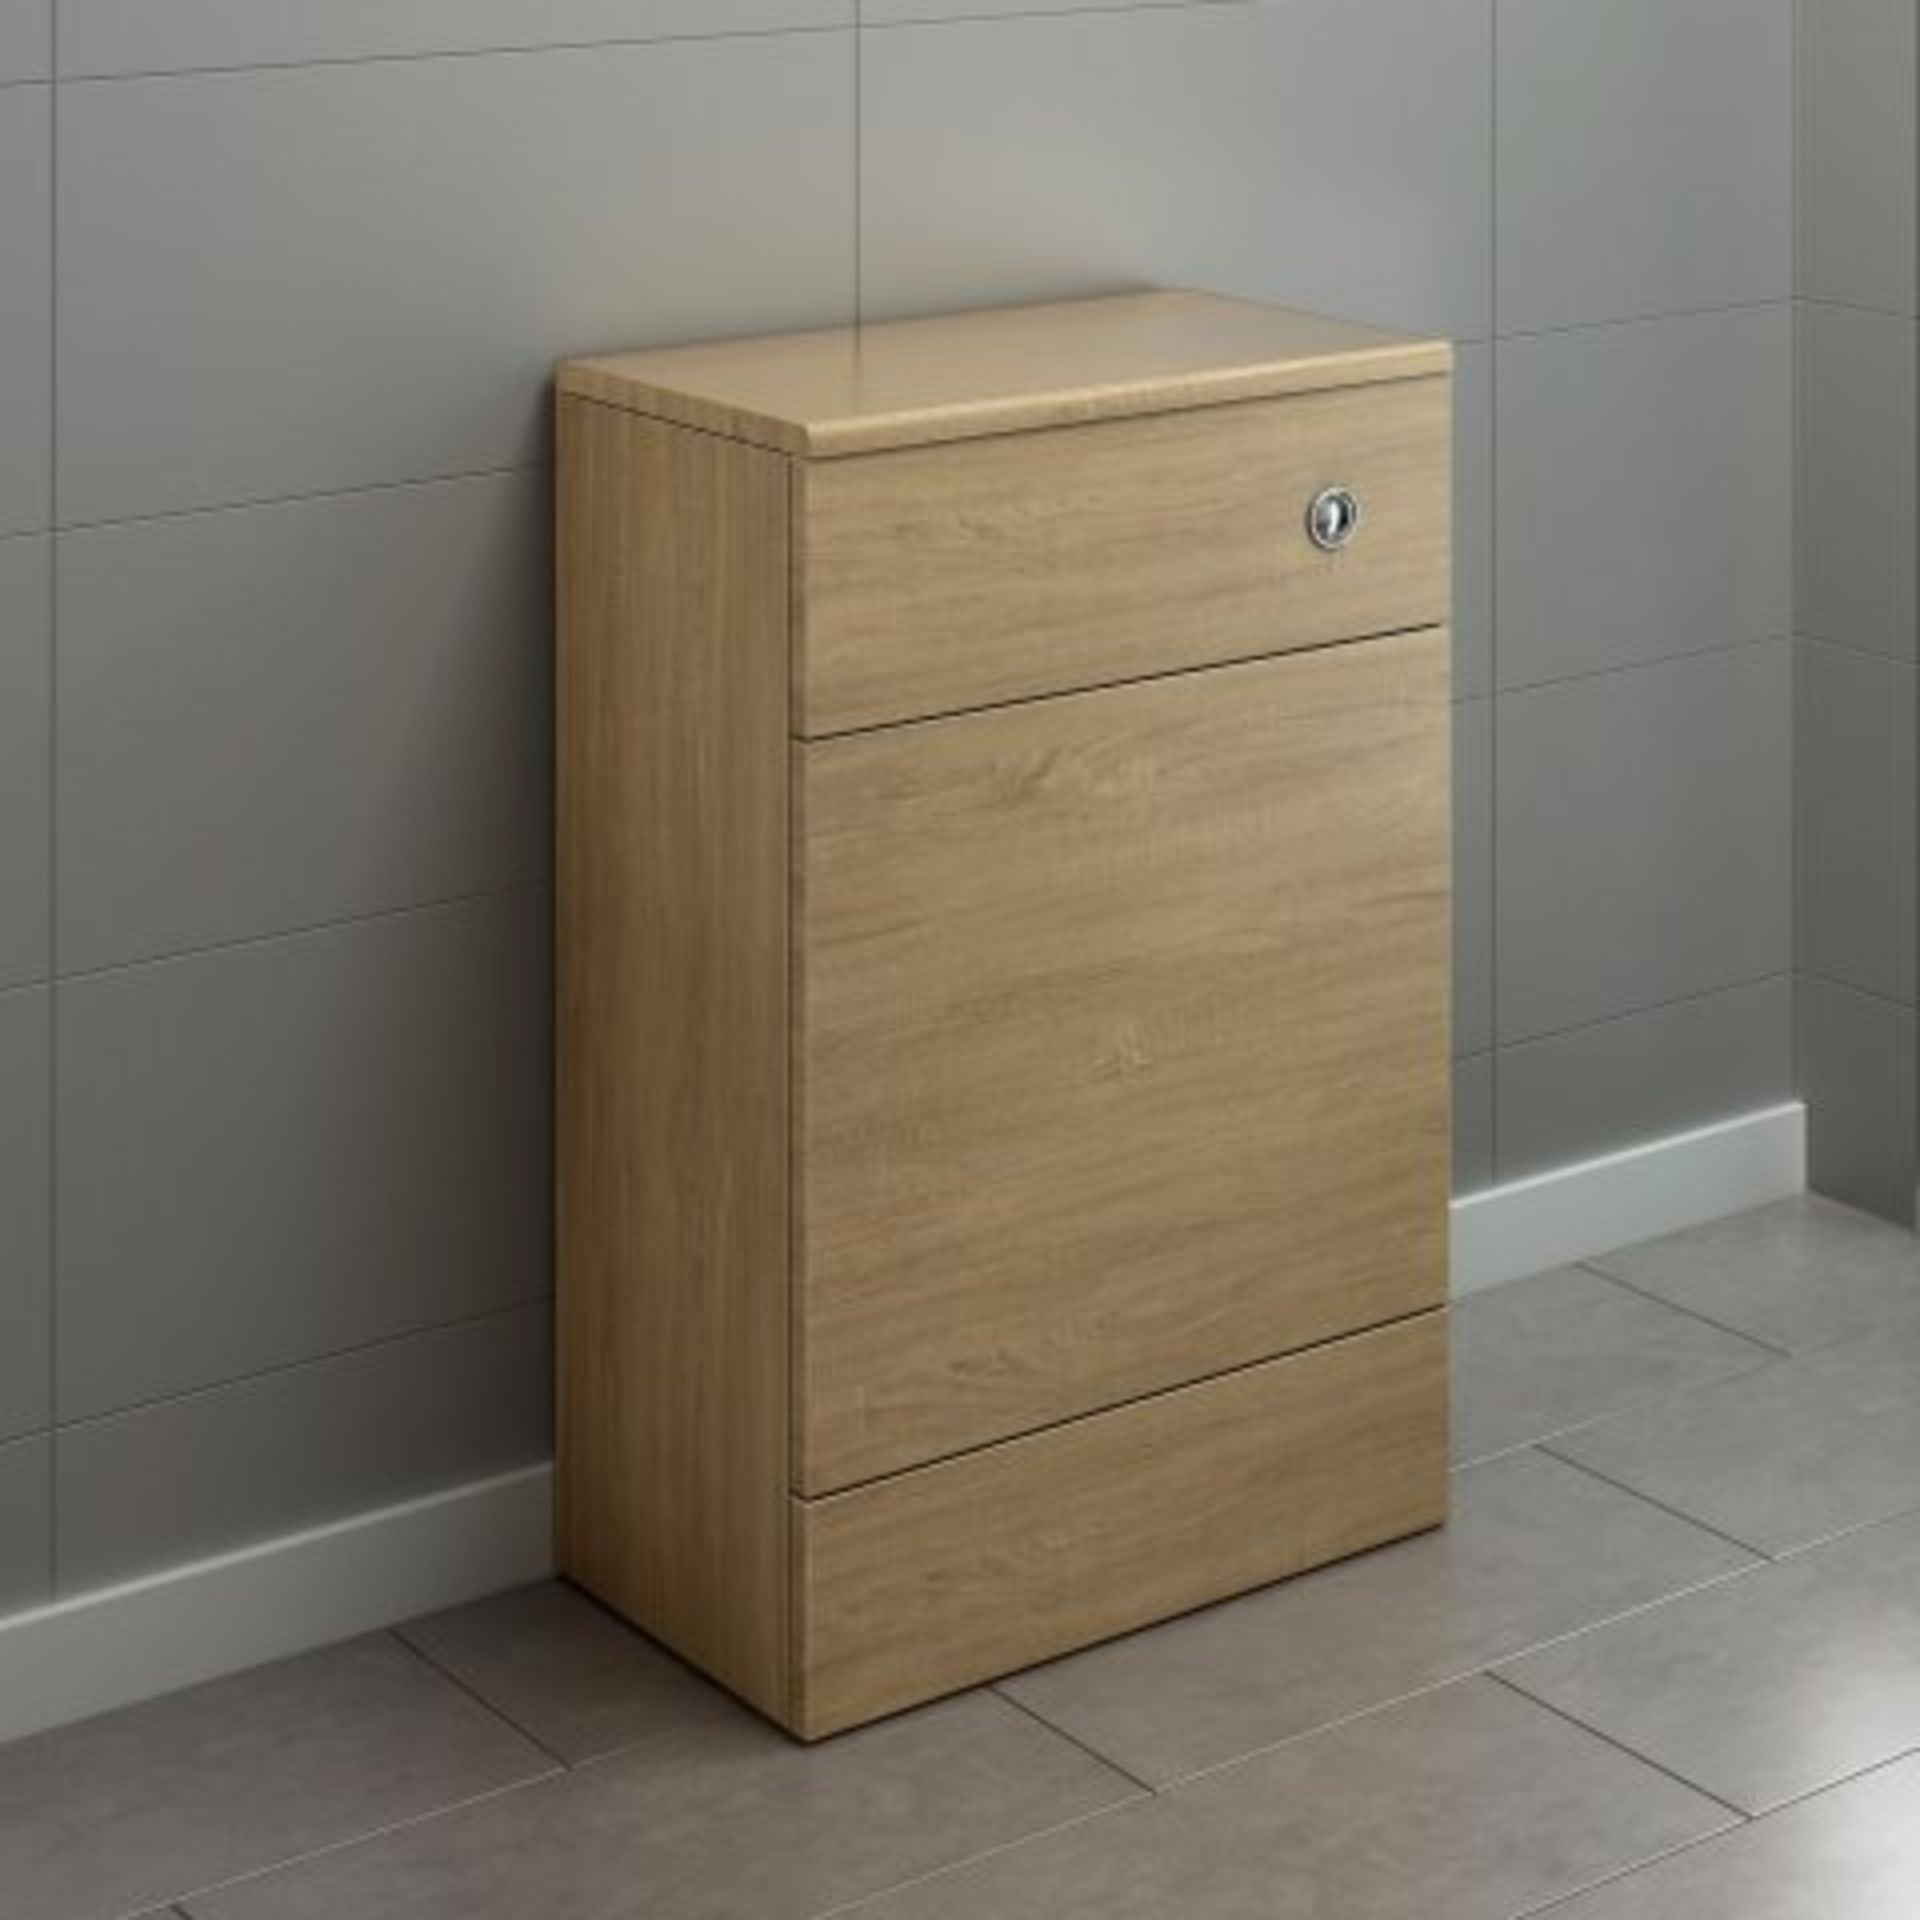 (H42) 500mm Harper Oak Effect Back To Wall Toilet Unit. RRP £199.99. This beautifully produced